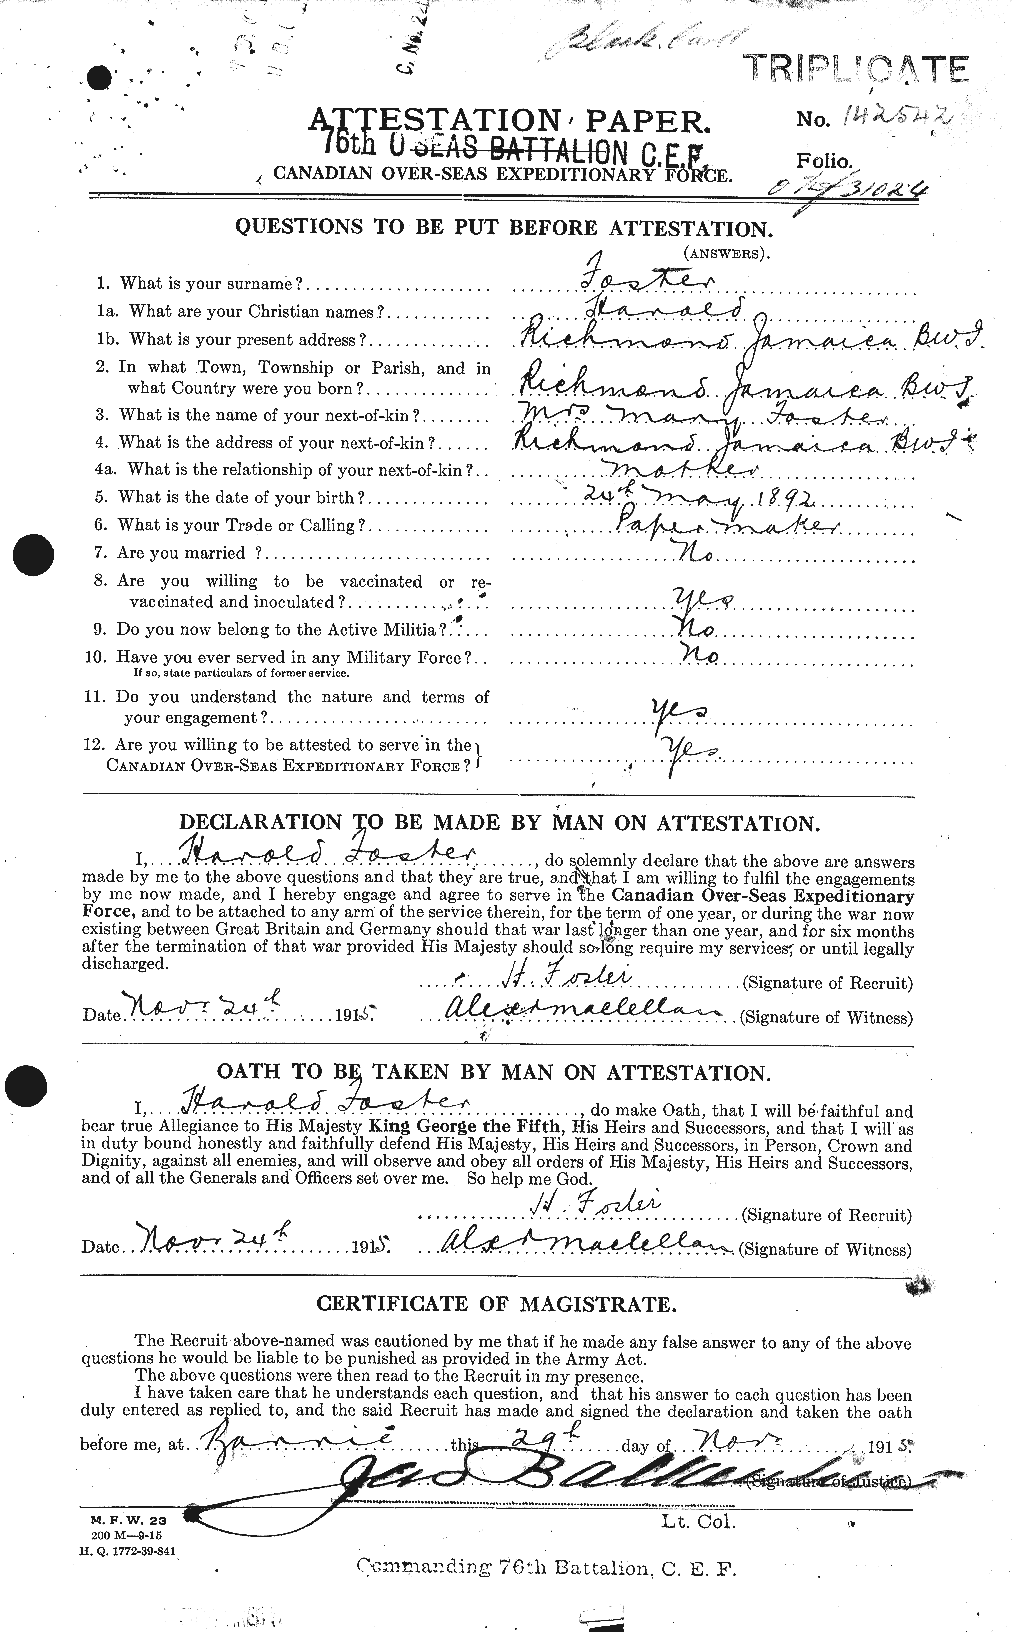 Personnel Records of the First World War - CEF 330723a